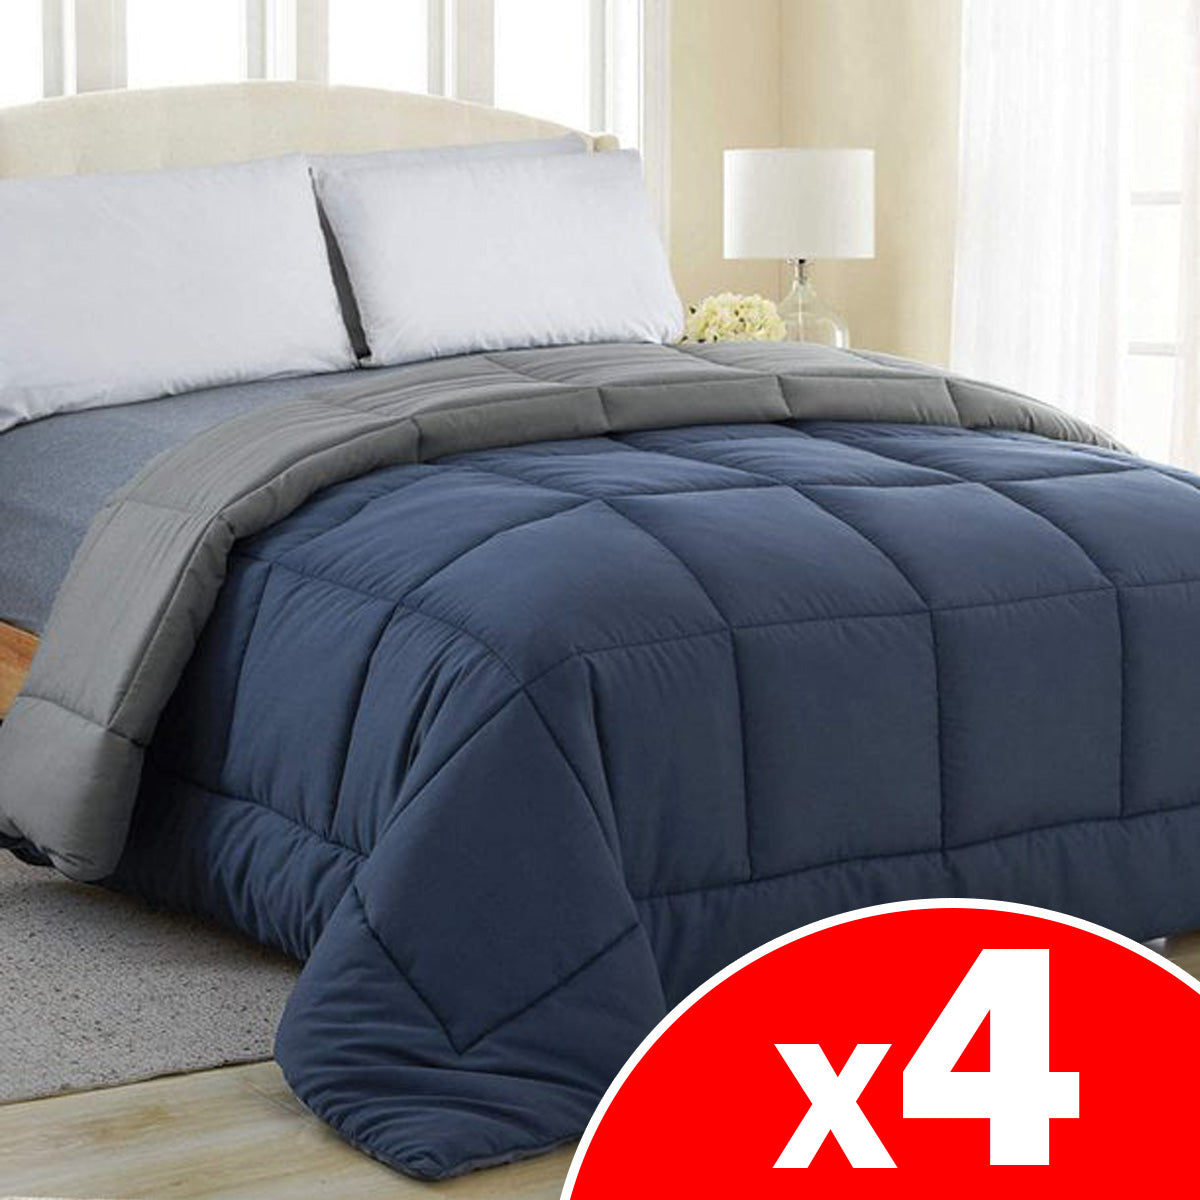 Equinox International Two Way Cotton All-Season Quilted Comforter, 4 Pack